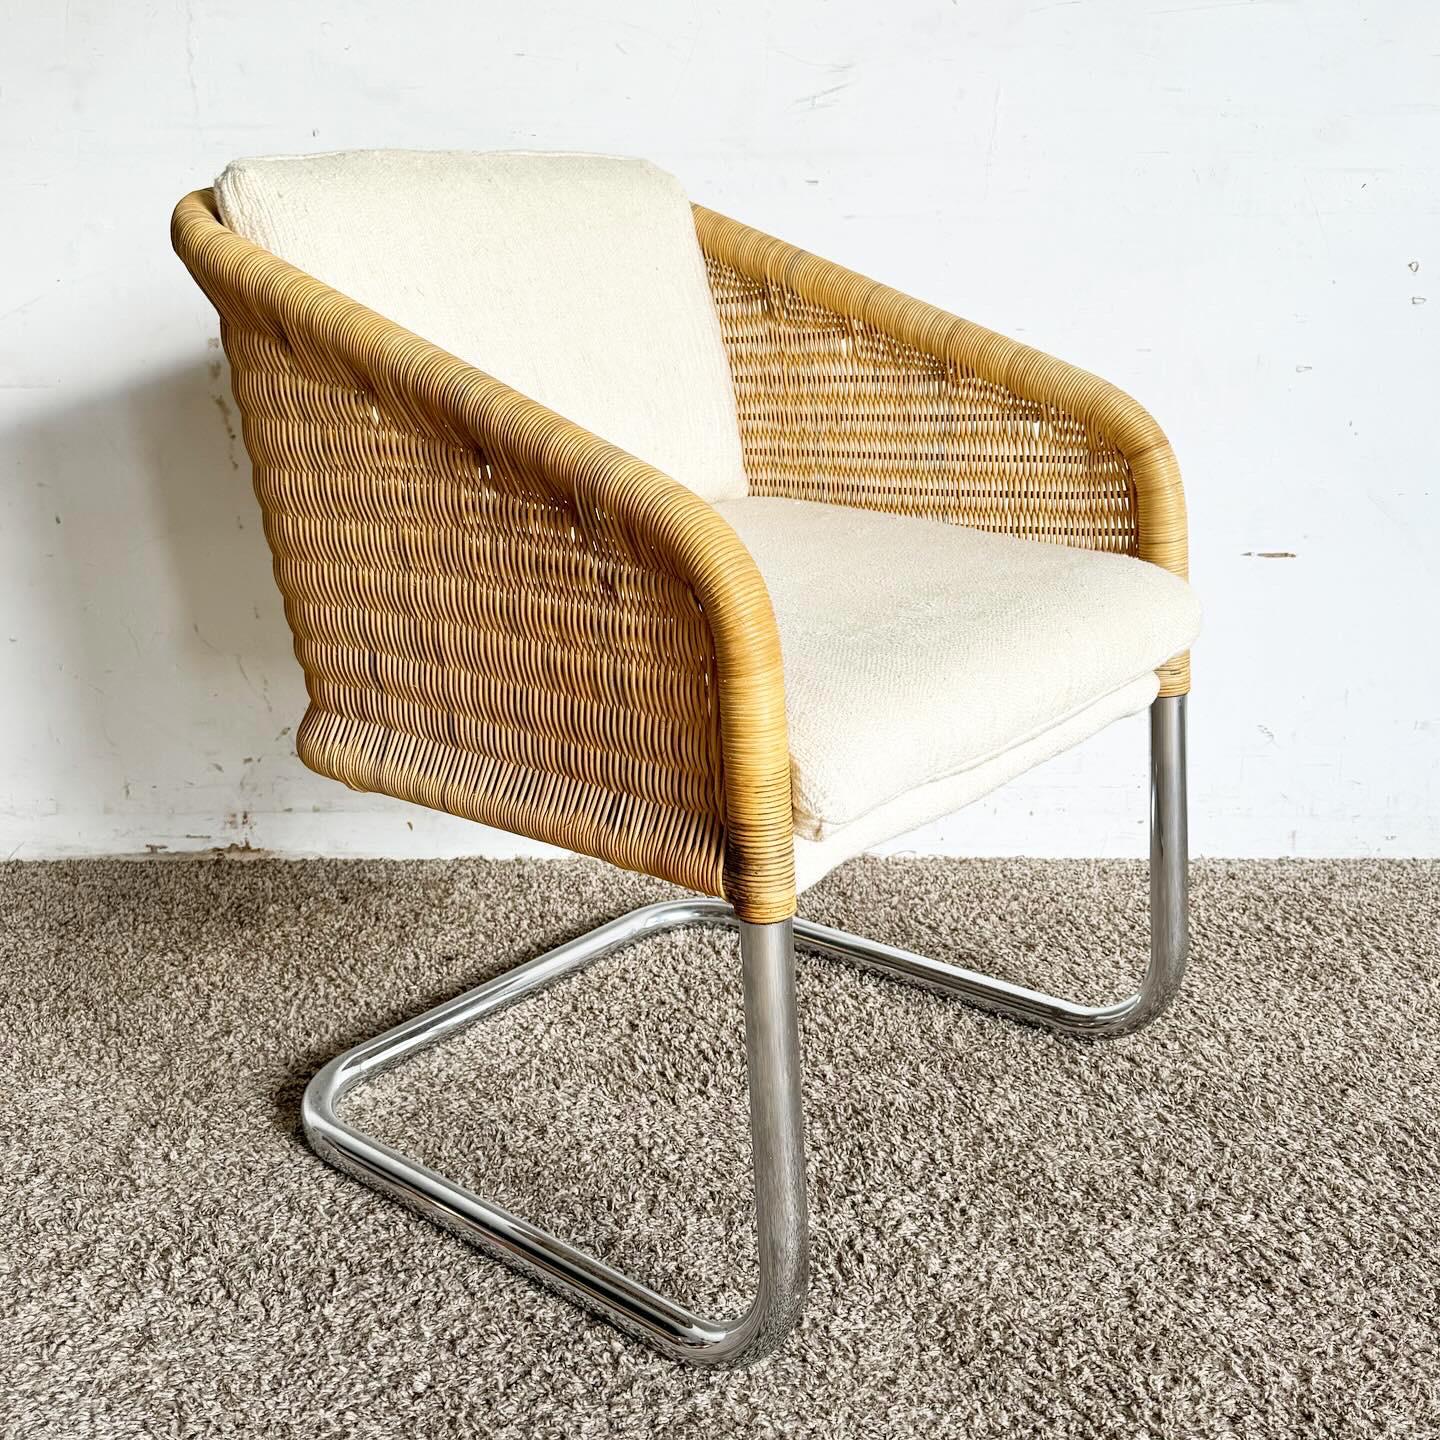 The Mid Century Modern Boho Chrome and Wicker Cantilever Arm Chair is a striking blend of styles. It features a sleek chrome frame and natural wicker seating, offering comfort with a floating cantilever design. This chair combines industrial appeal